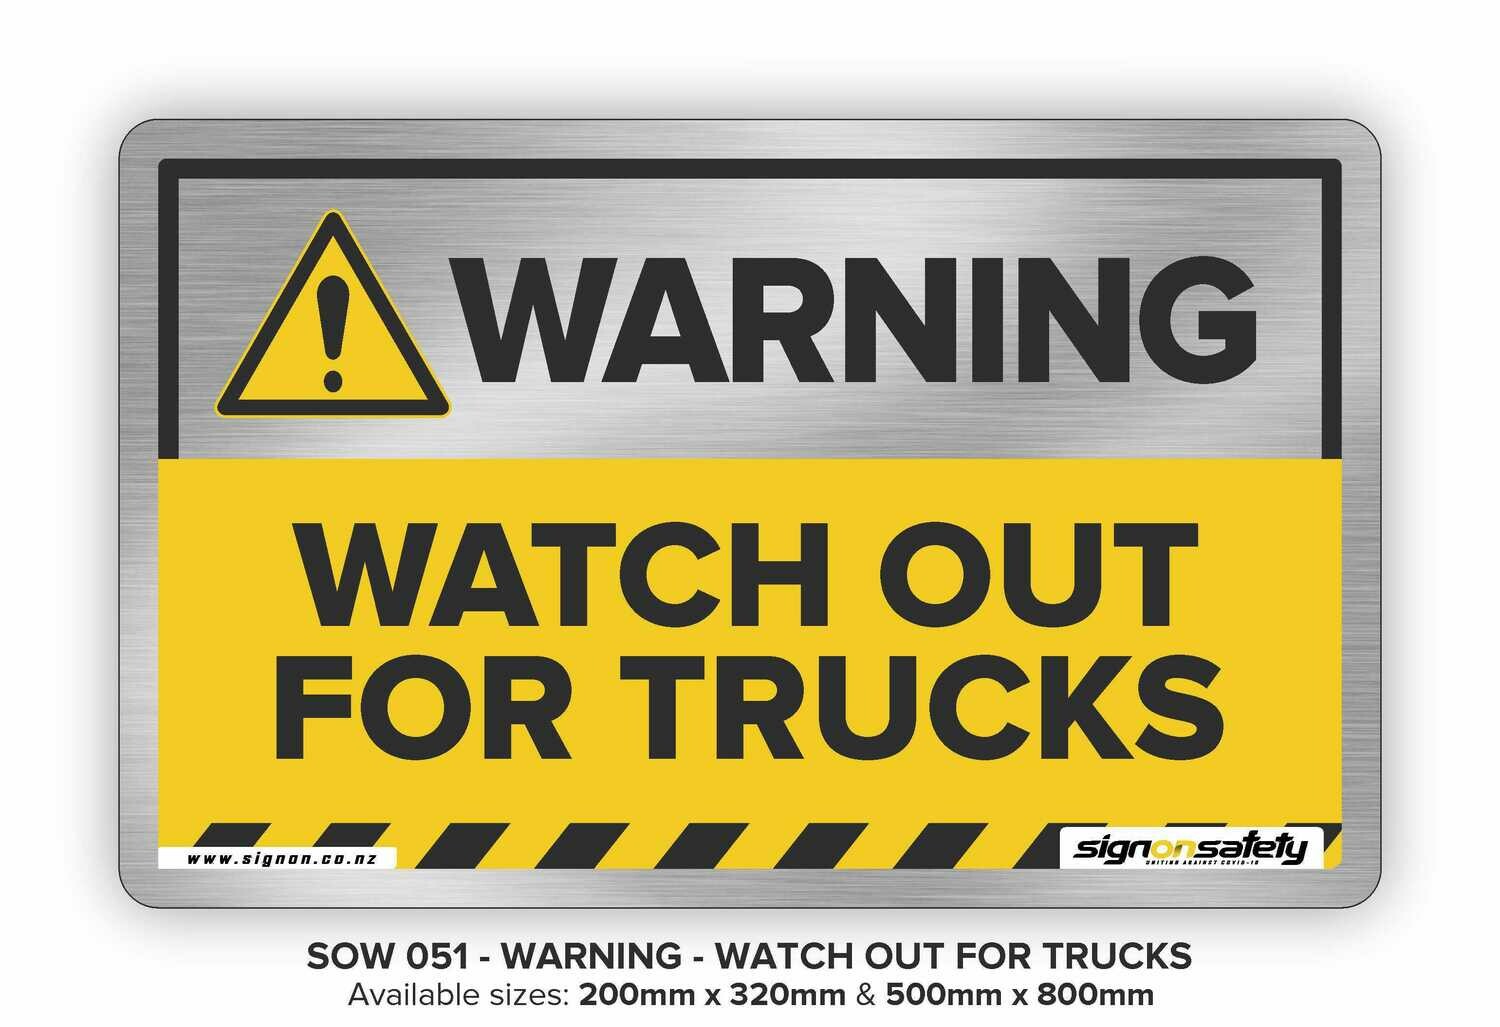 Warning - Watch Out For Trucks